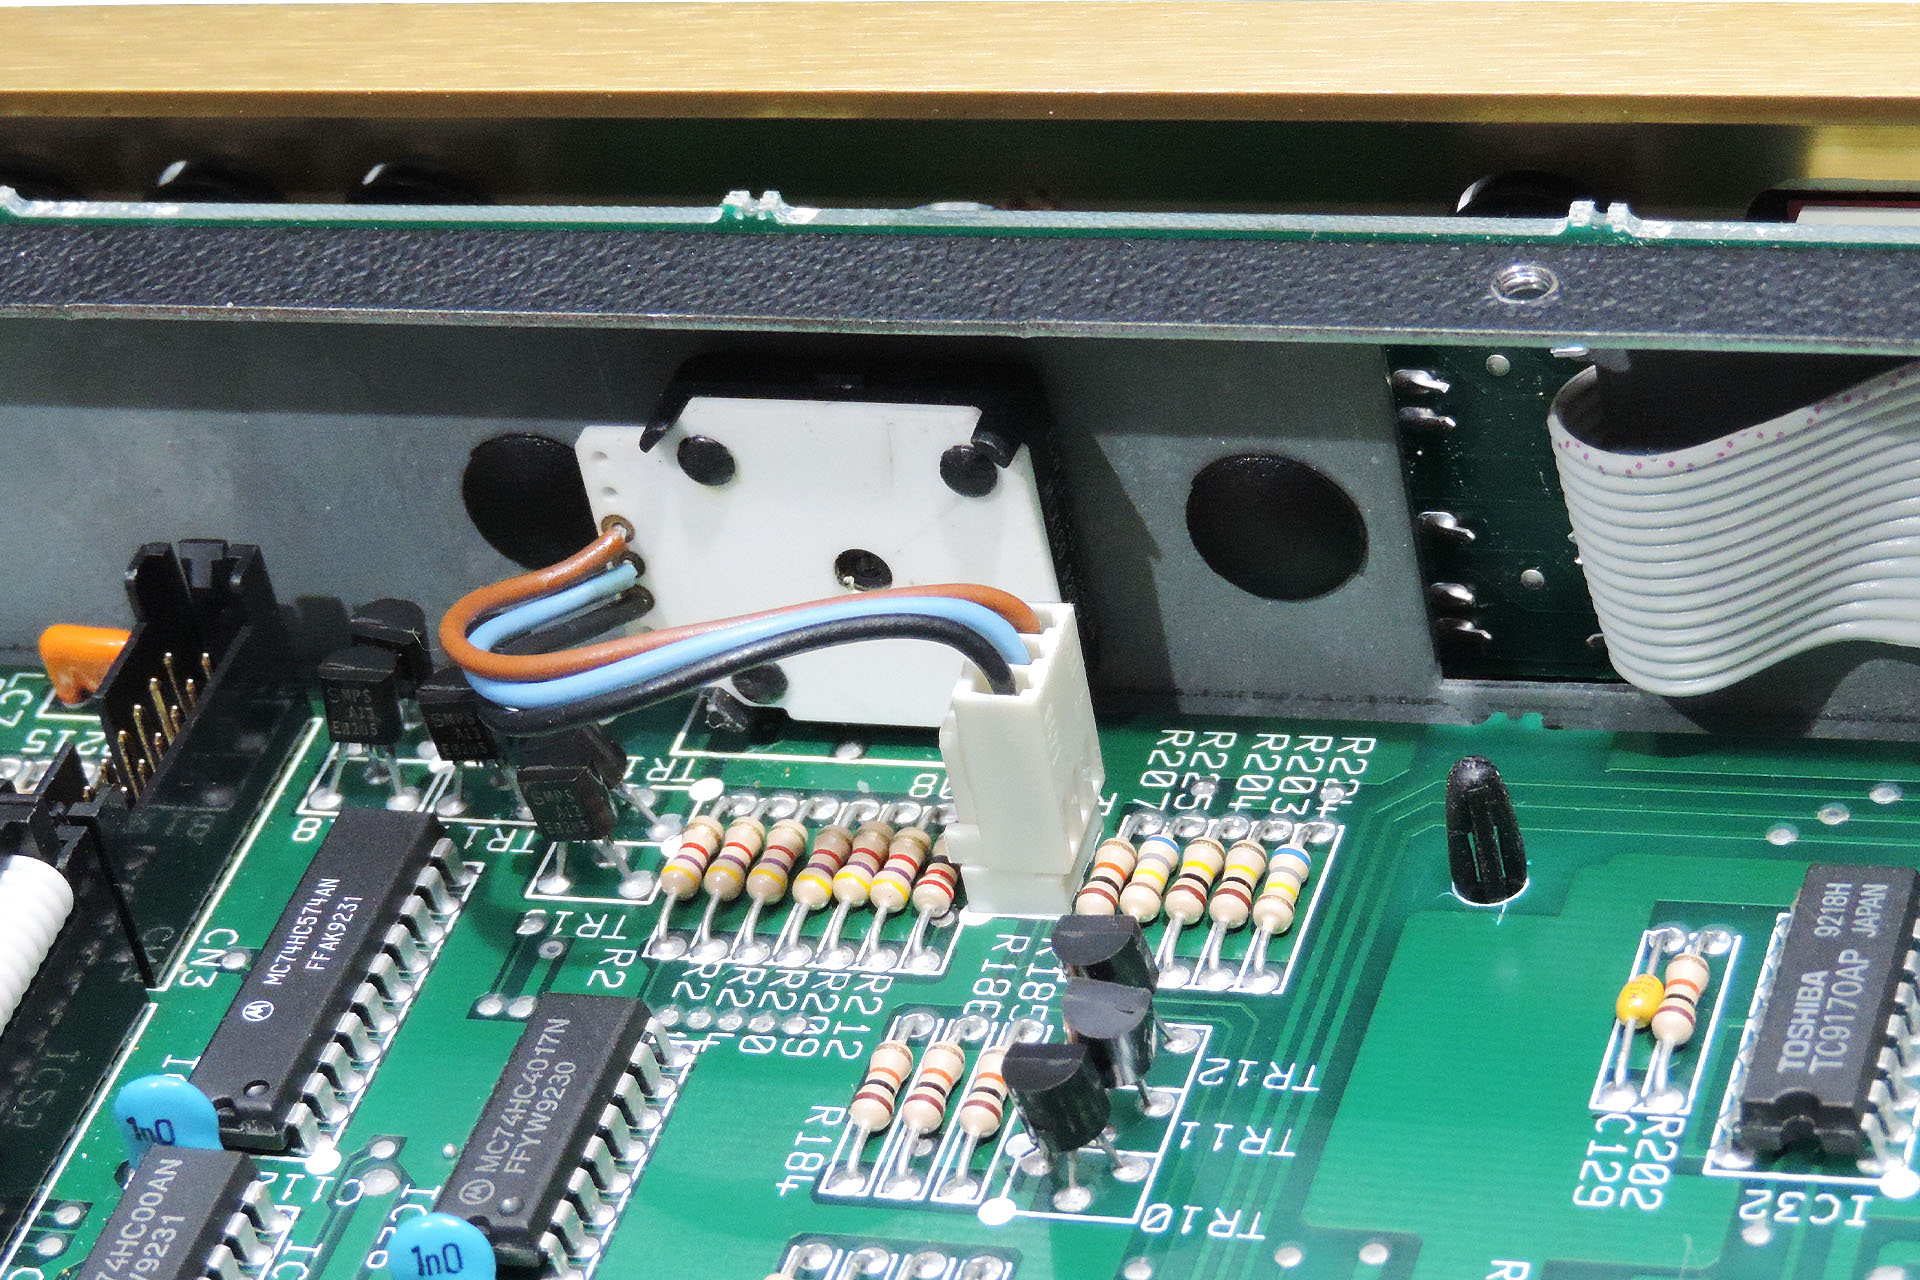 Eclipse bounce eliminator fits between the data encoder and the PCB connection in Marshall JMP-1